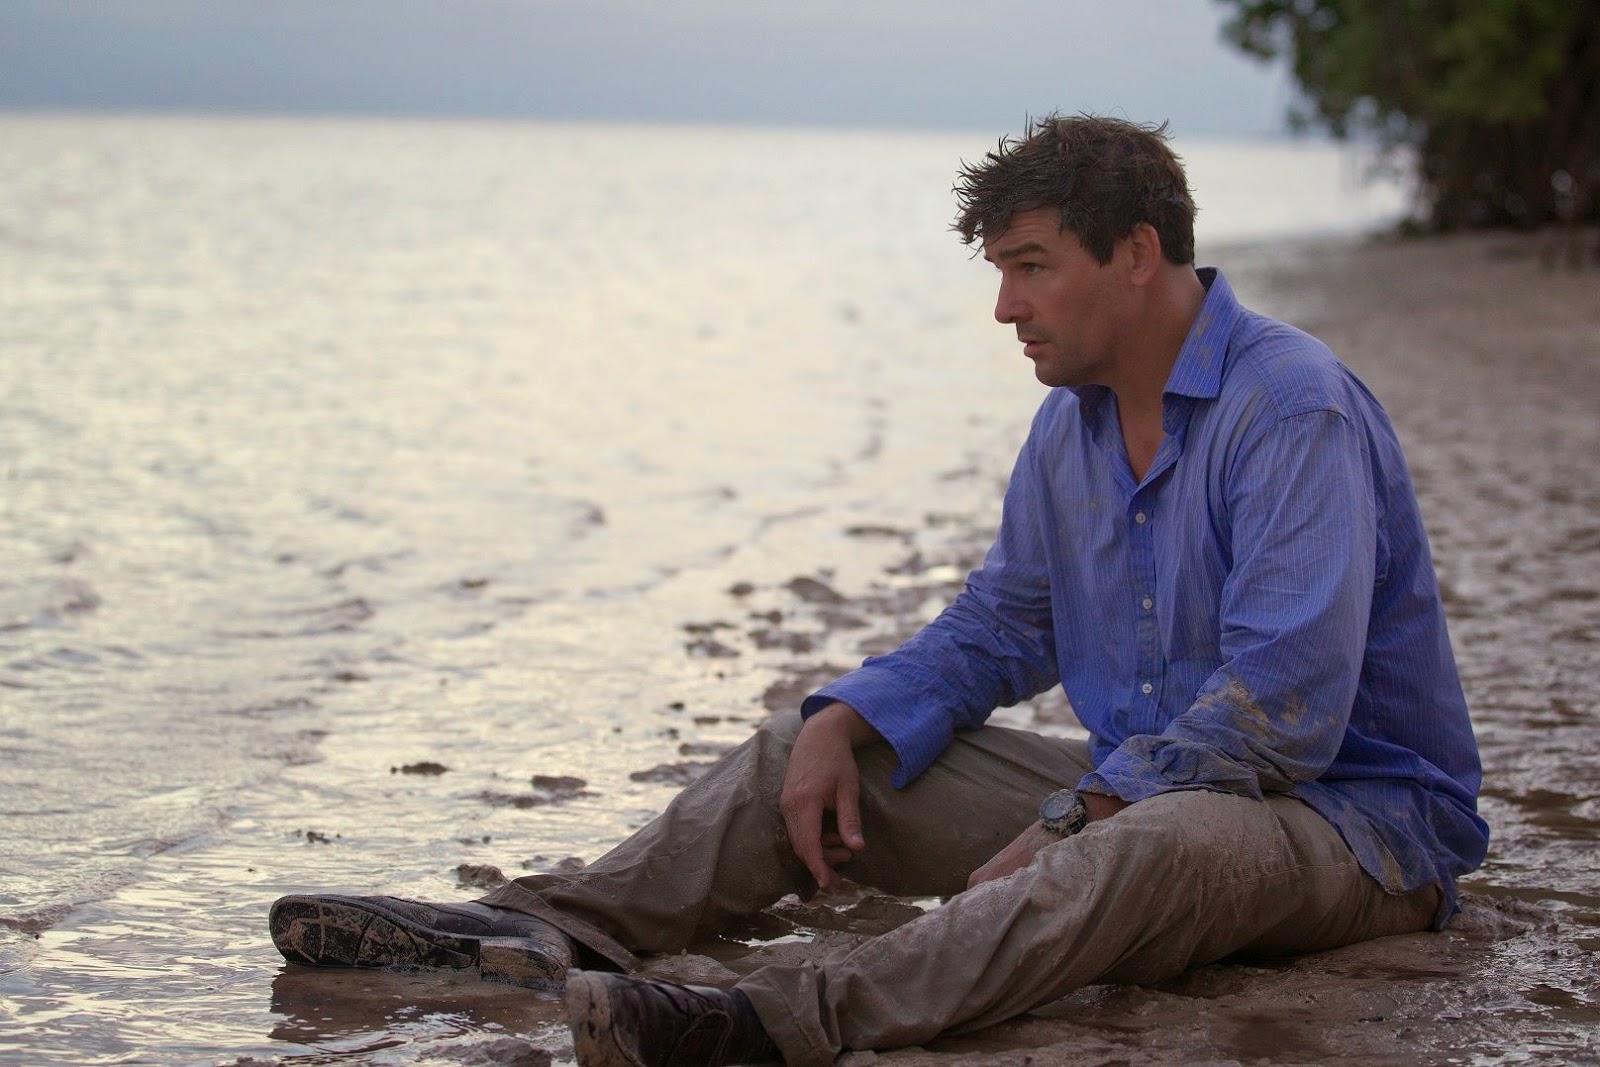 Bloodline – Season 1 Review & Discussion – “We Did a Bad Thing”